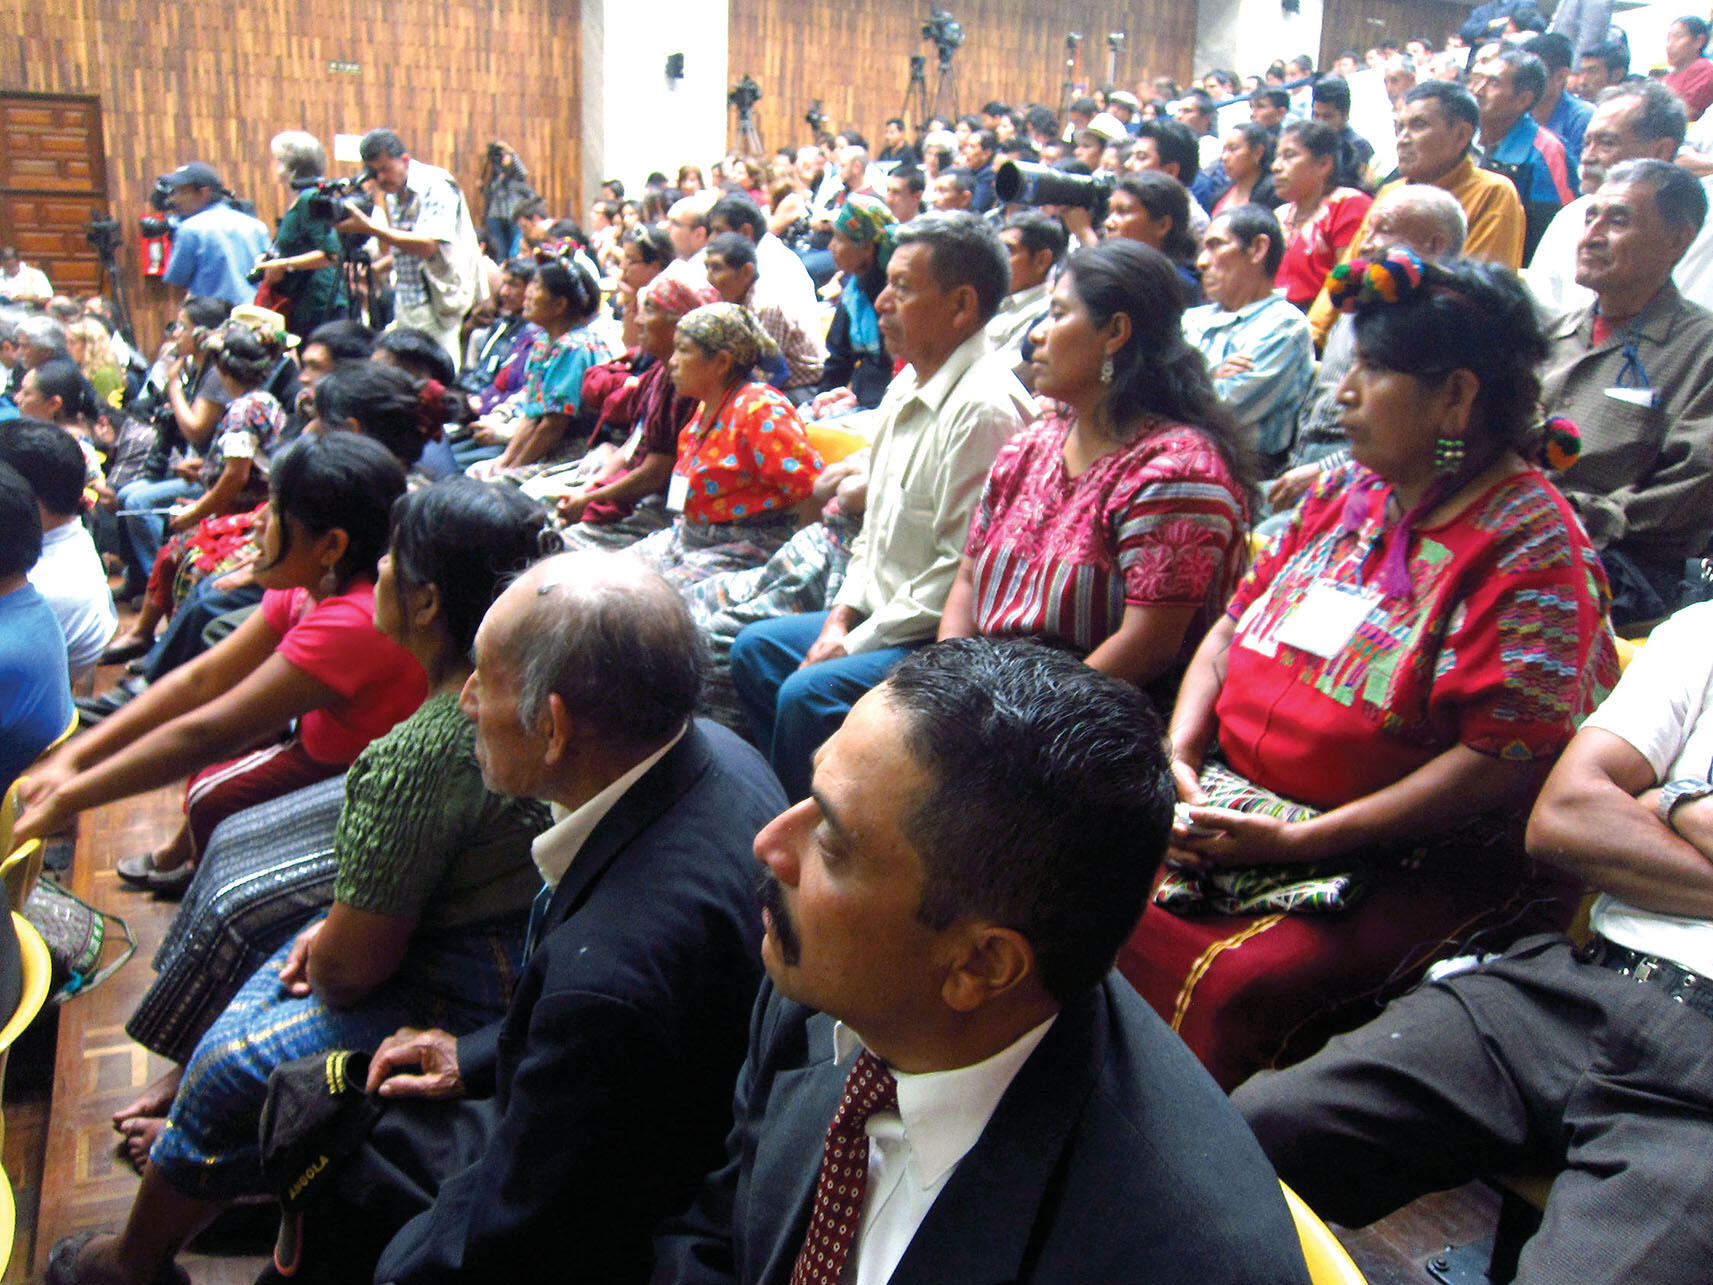 The Guatemalan courtroom audience, in a mixture of Indigenous and formal dress, watches the Ríos Montt trial proceed. (Photo by Anthony Fontes.)